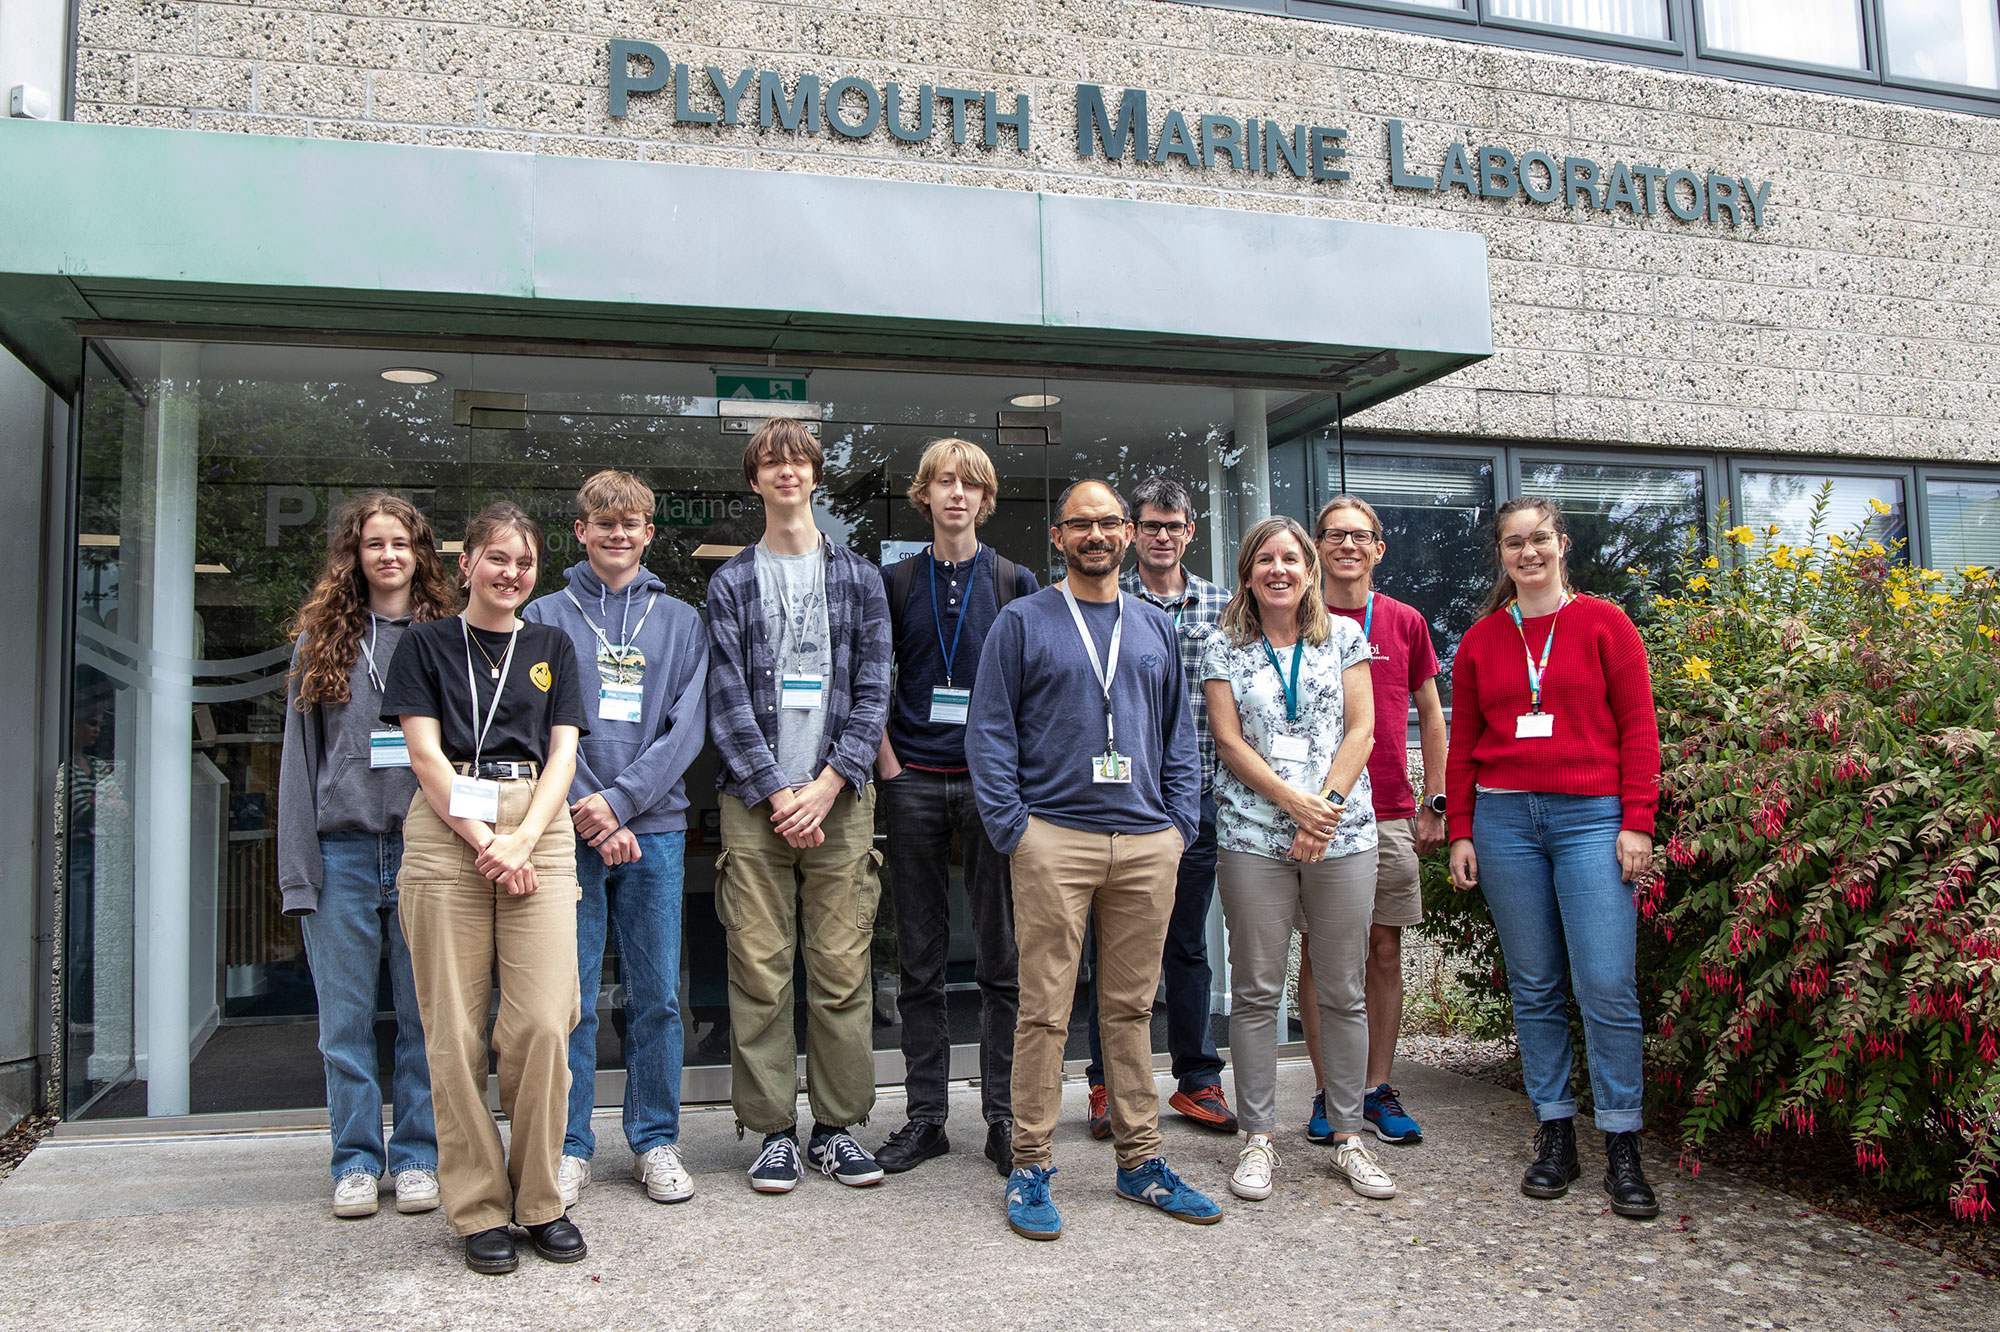 Group photo of students and staff outside the Plymouth Marine Laboratory building